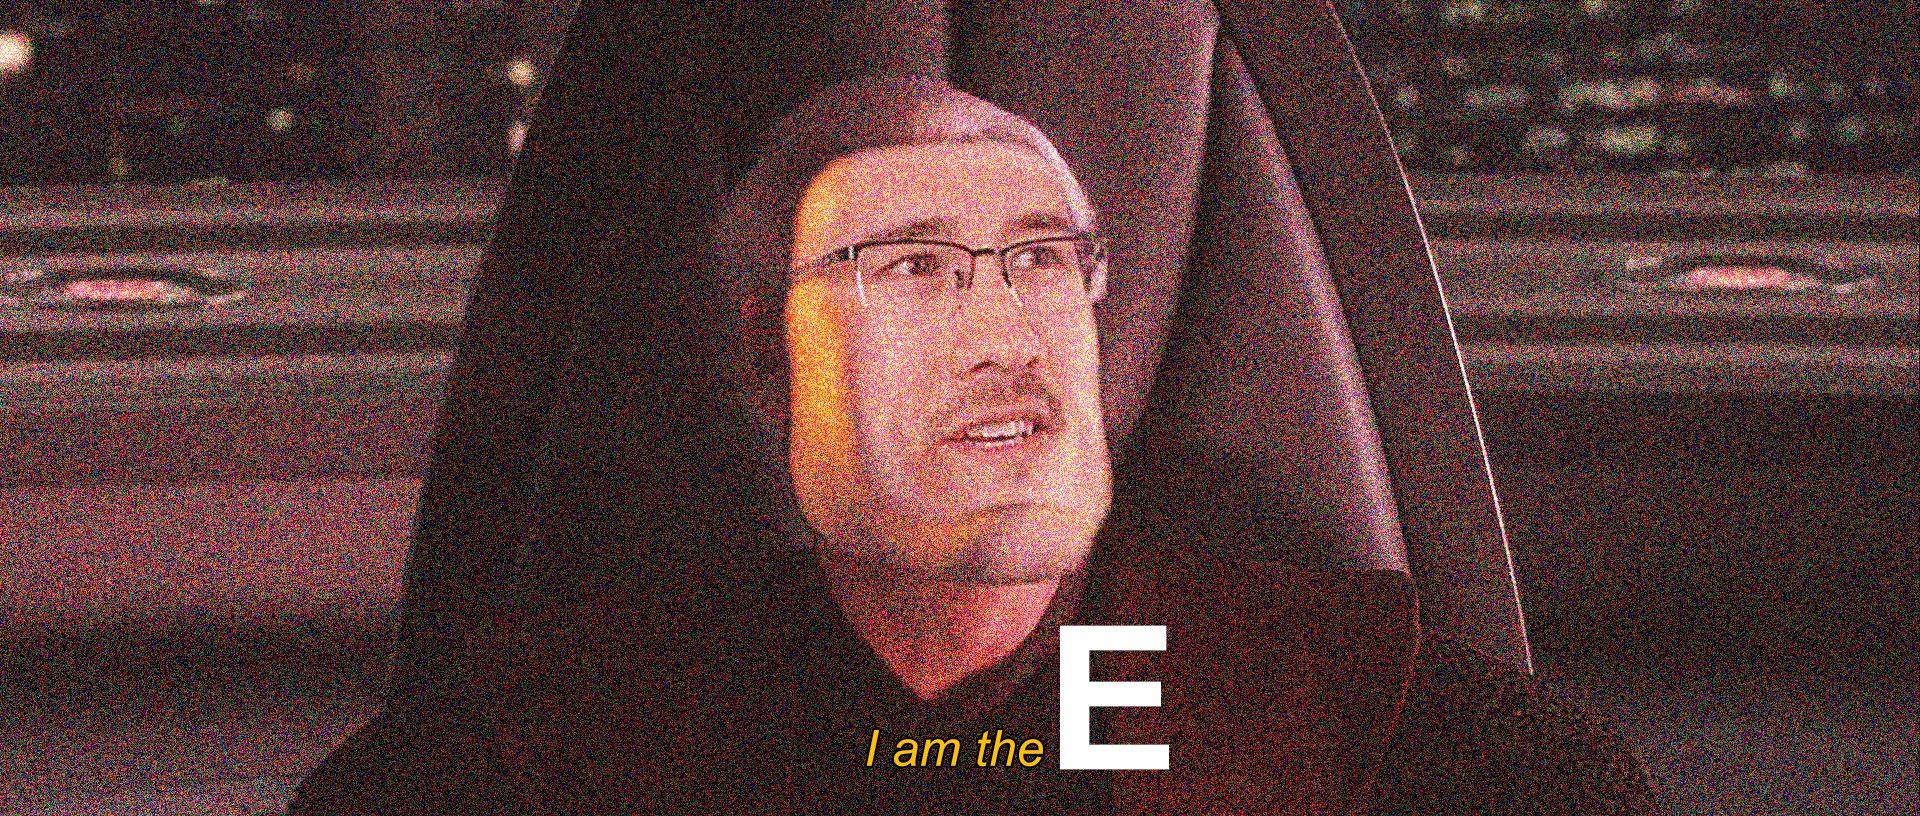 Why have high quality meme when you can simply press E